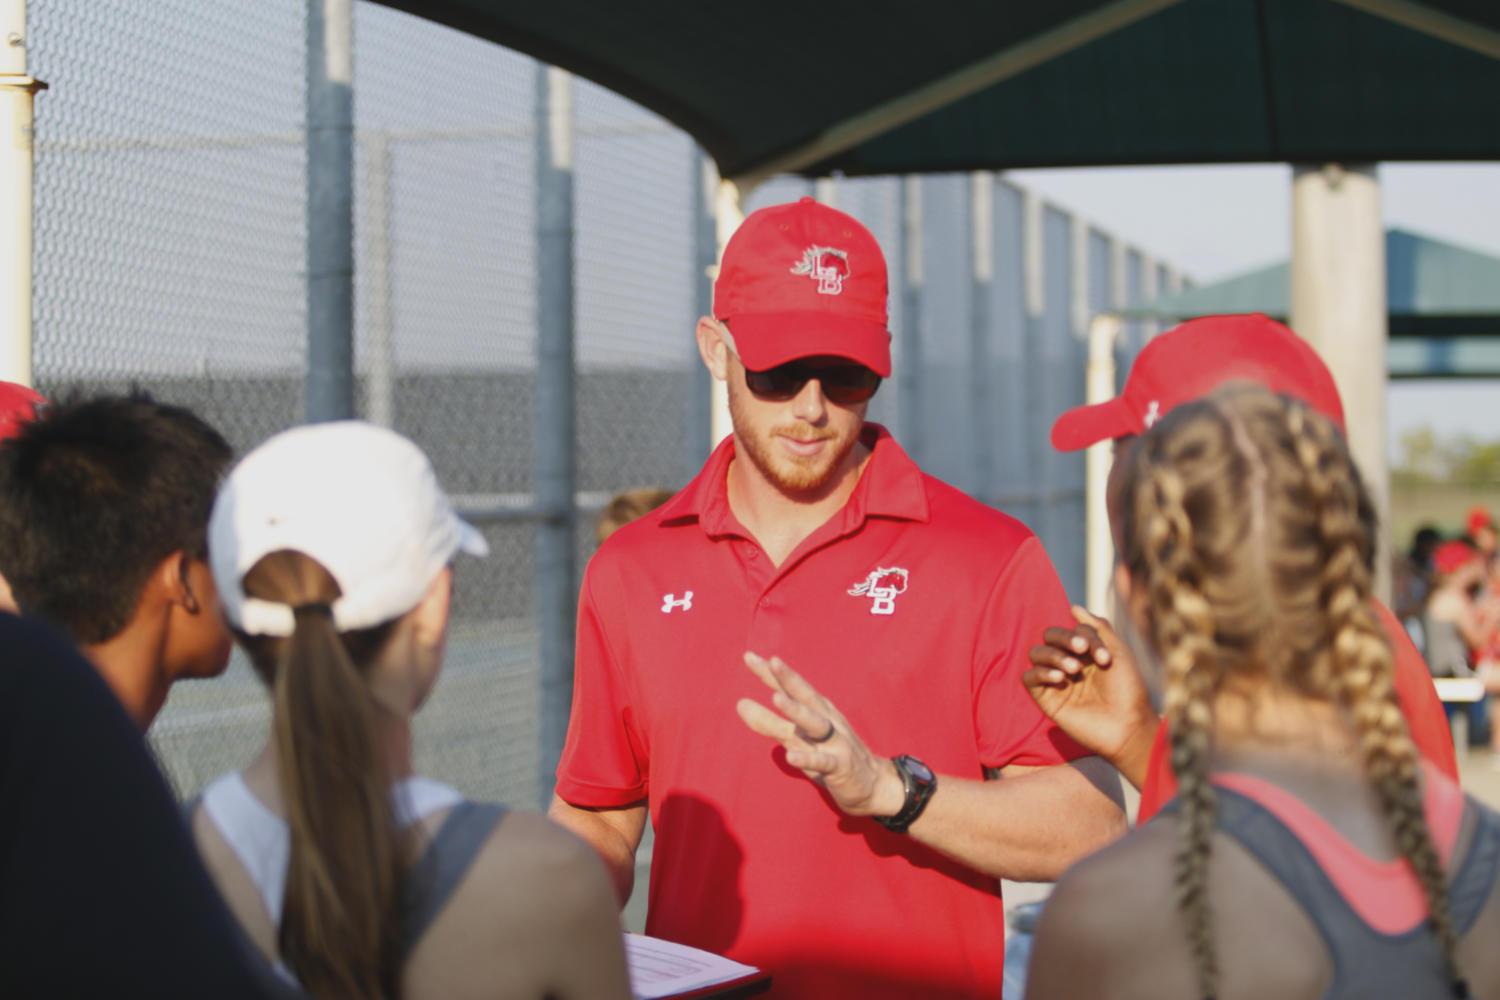 Coach Dozier talks to the JV tennis team about how they all performed. JV will play Timberview Sept. 14 at Legacy High School. (Dalton Mix photo)